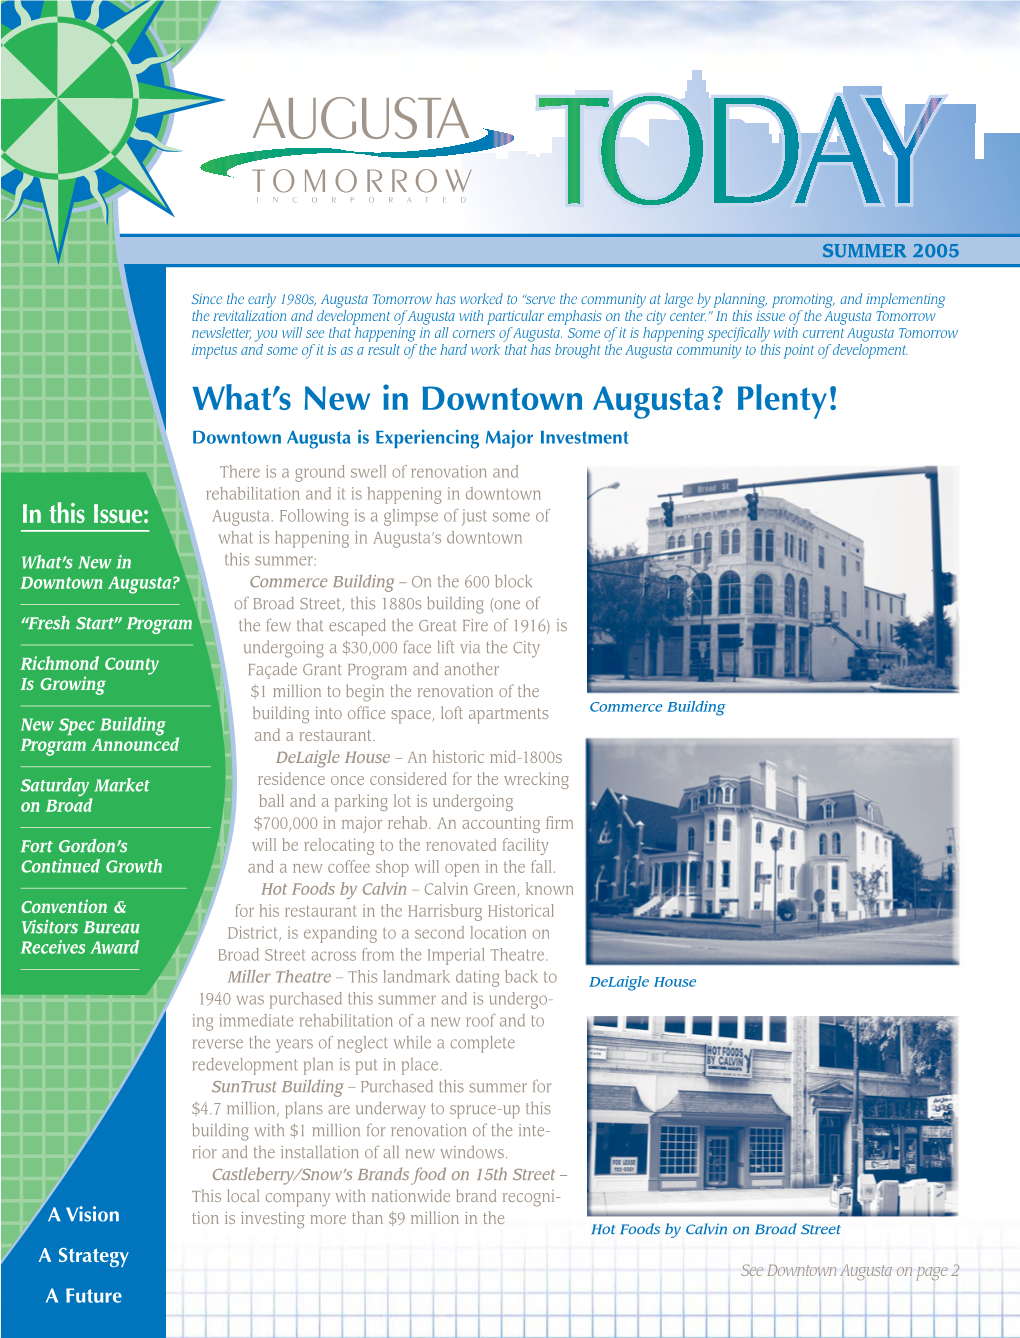 What's New in Downtown Augusta?